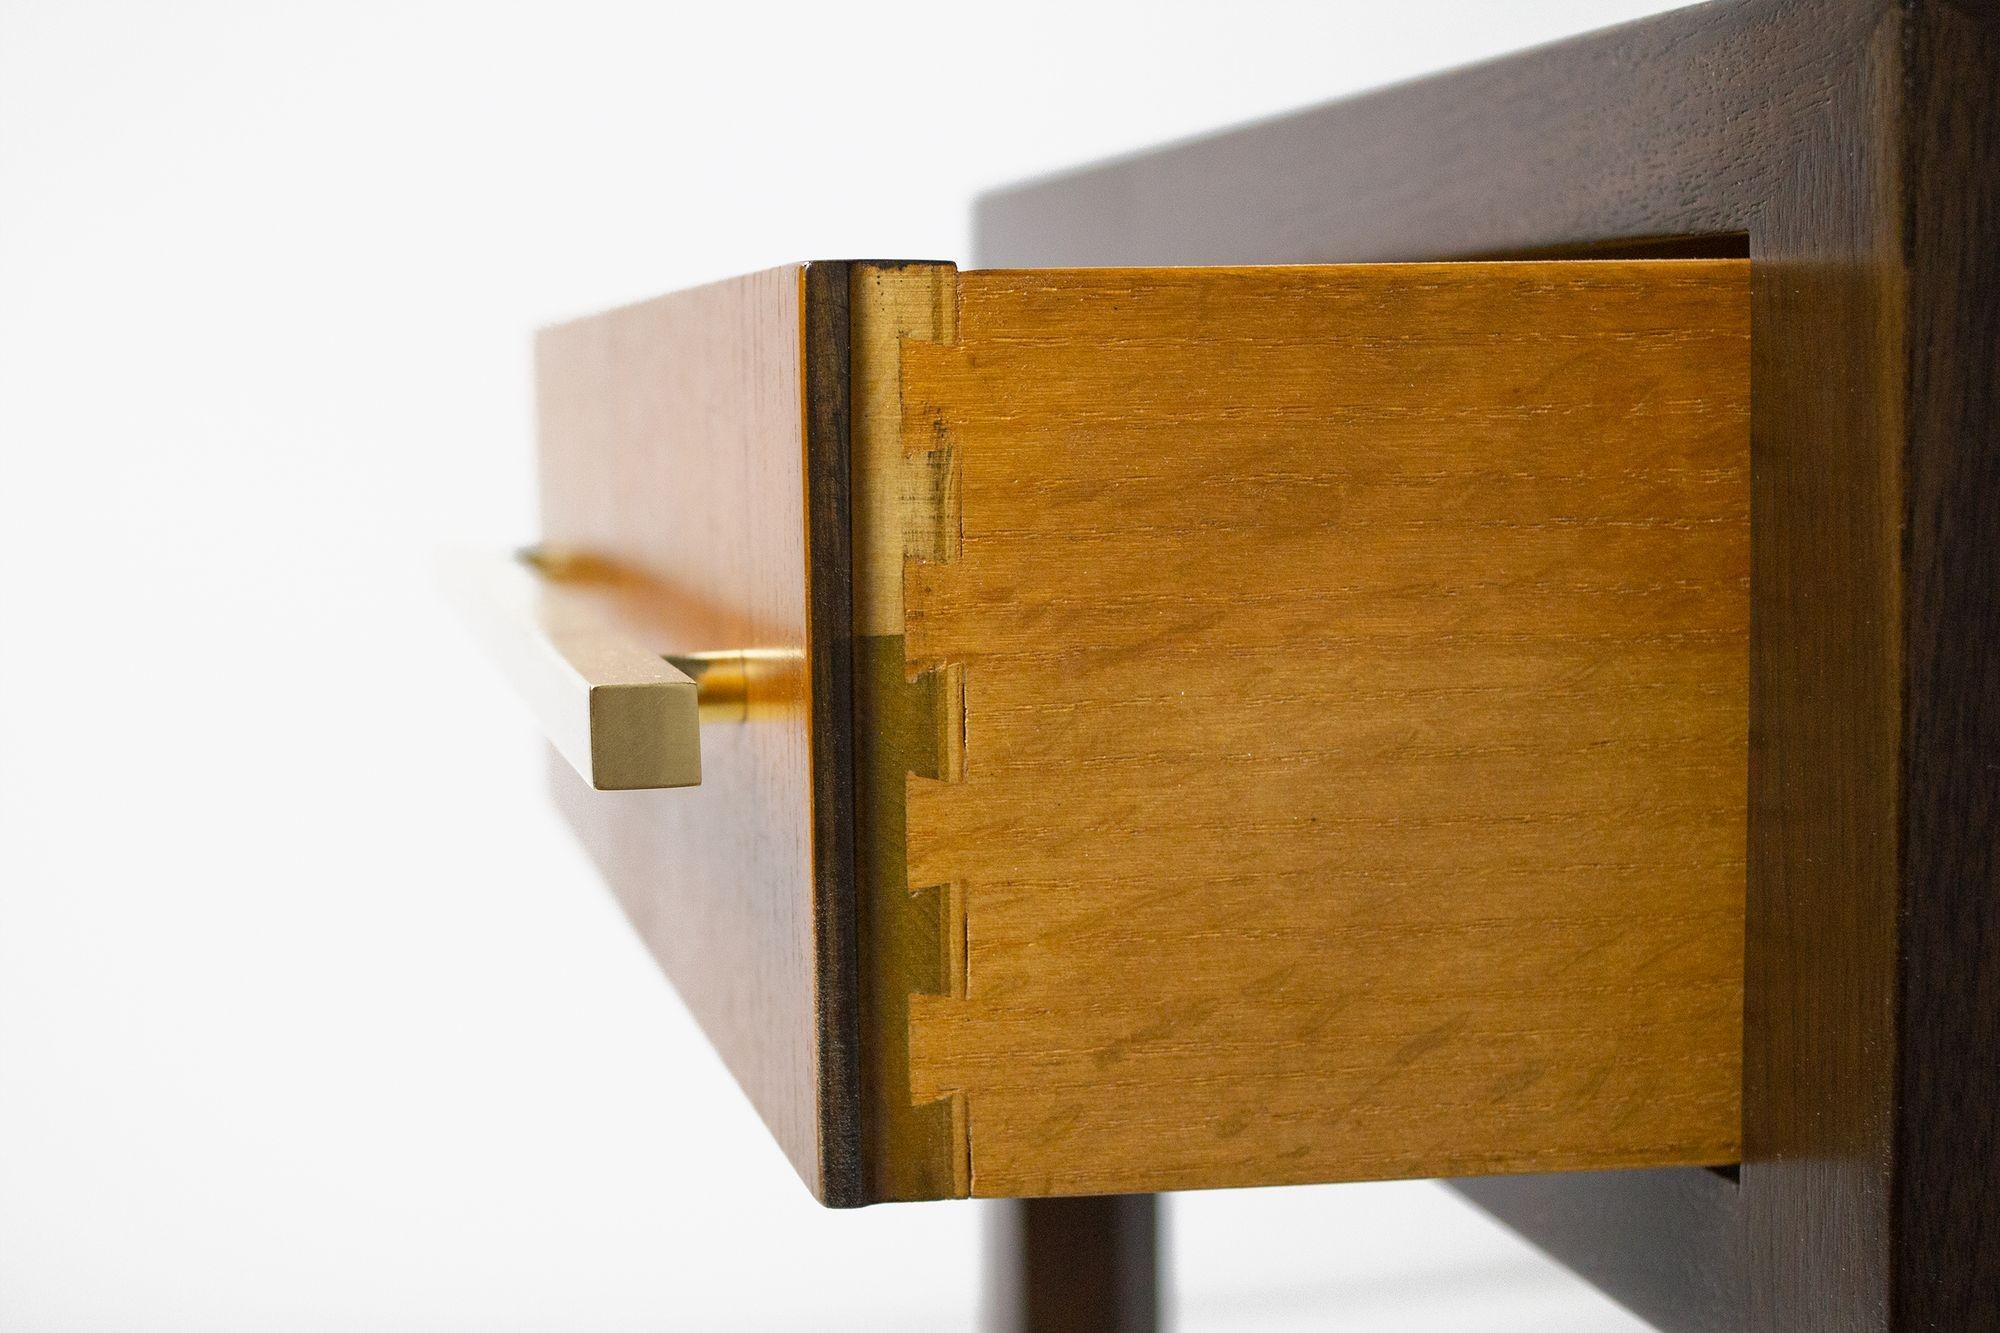 20th Century Nightstand / Side Tables designed by Michael Taylor for Baker.